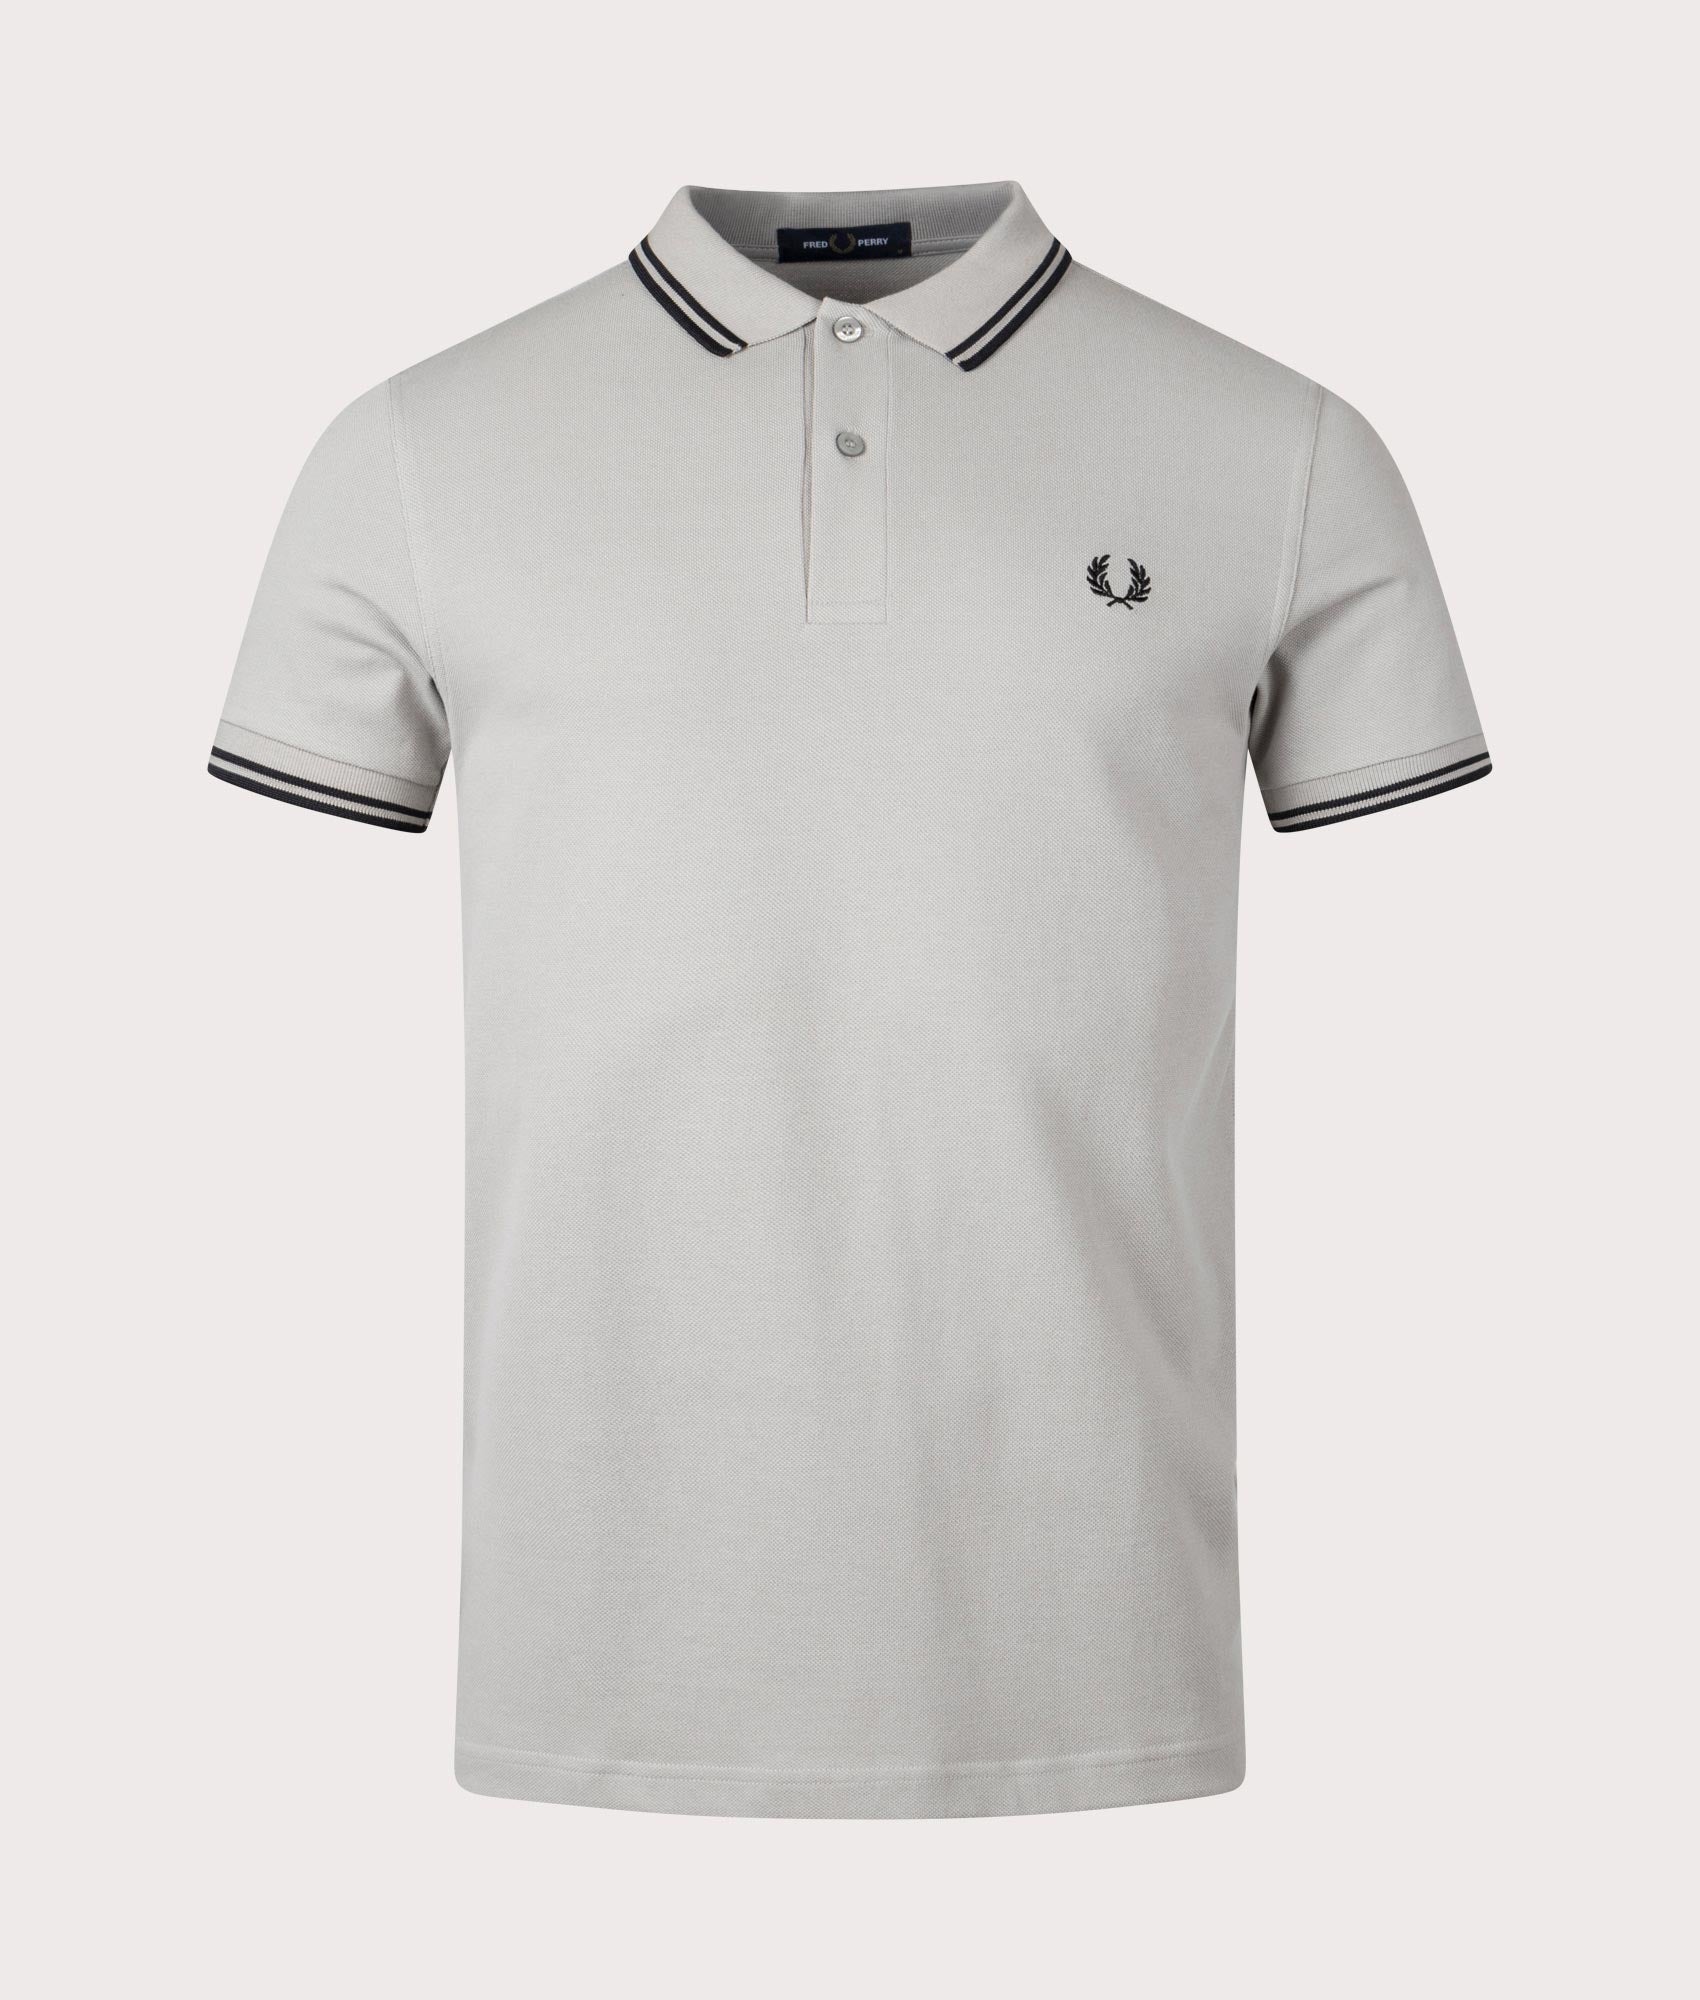 Fred Perry Mens Twin Tipped Polo Shirt - Colour: R41 Limestone/Black - Size: XXL